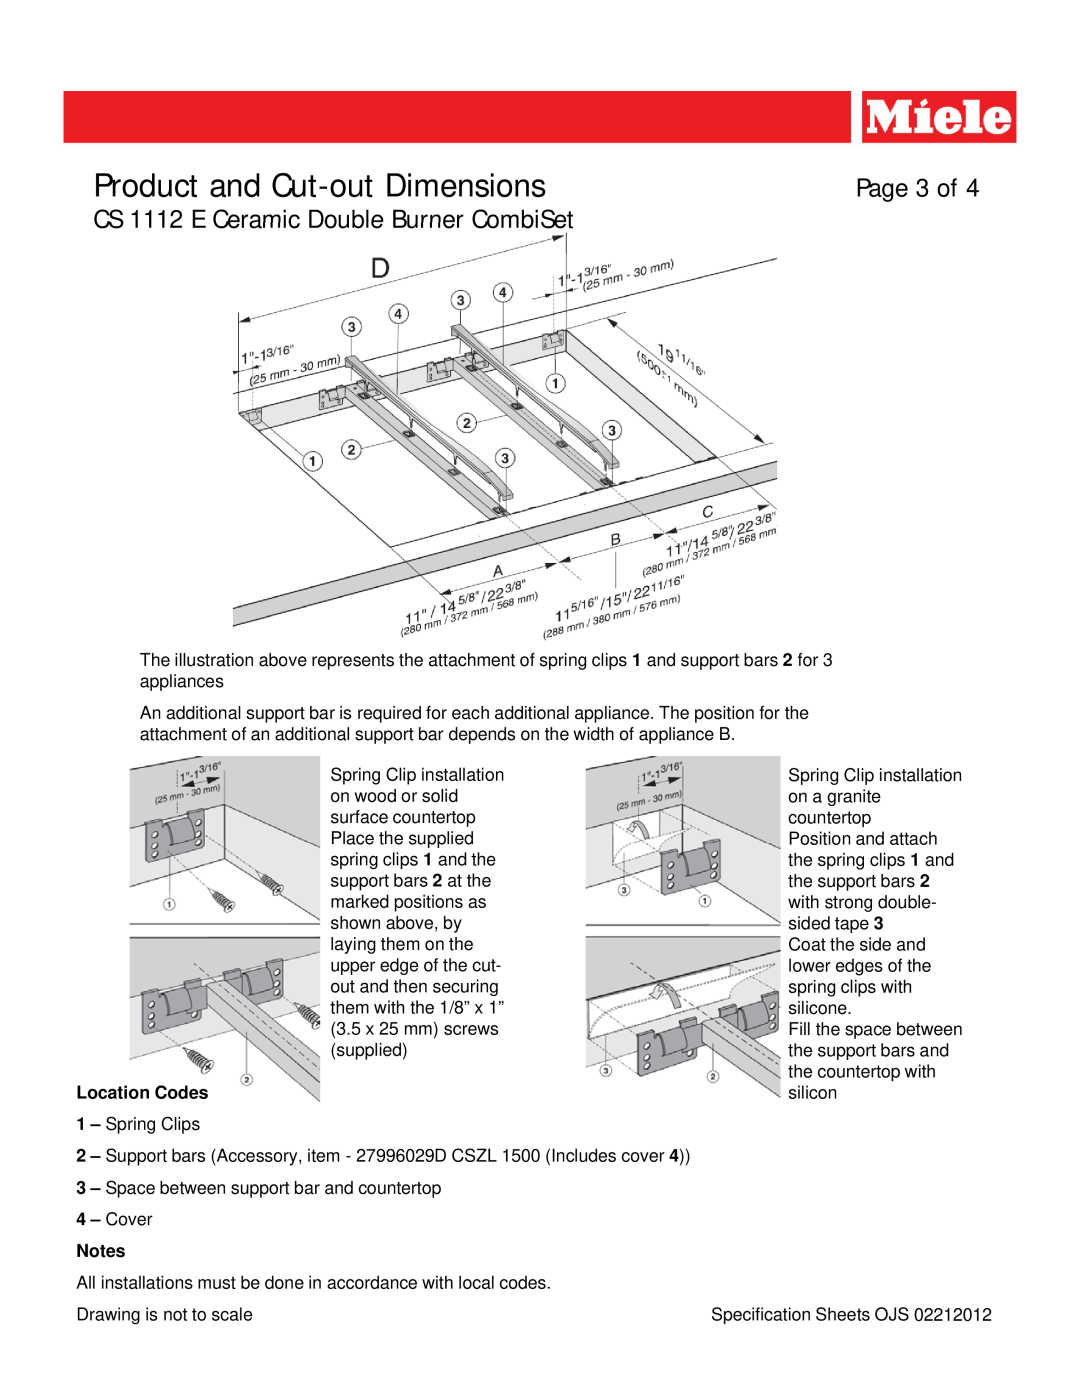 Miele dimensions Page 3 of, Location Codes, Product and Cut-out Dimensions, CS 1112 E Ceramic Double Burner CombiSet 